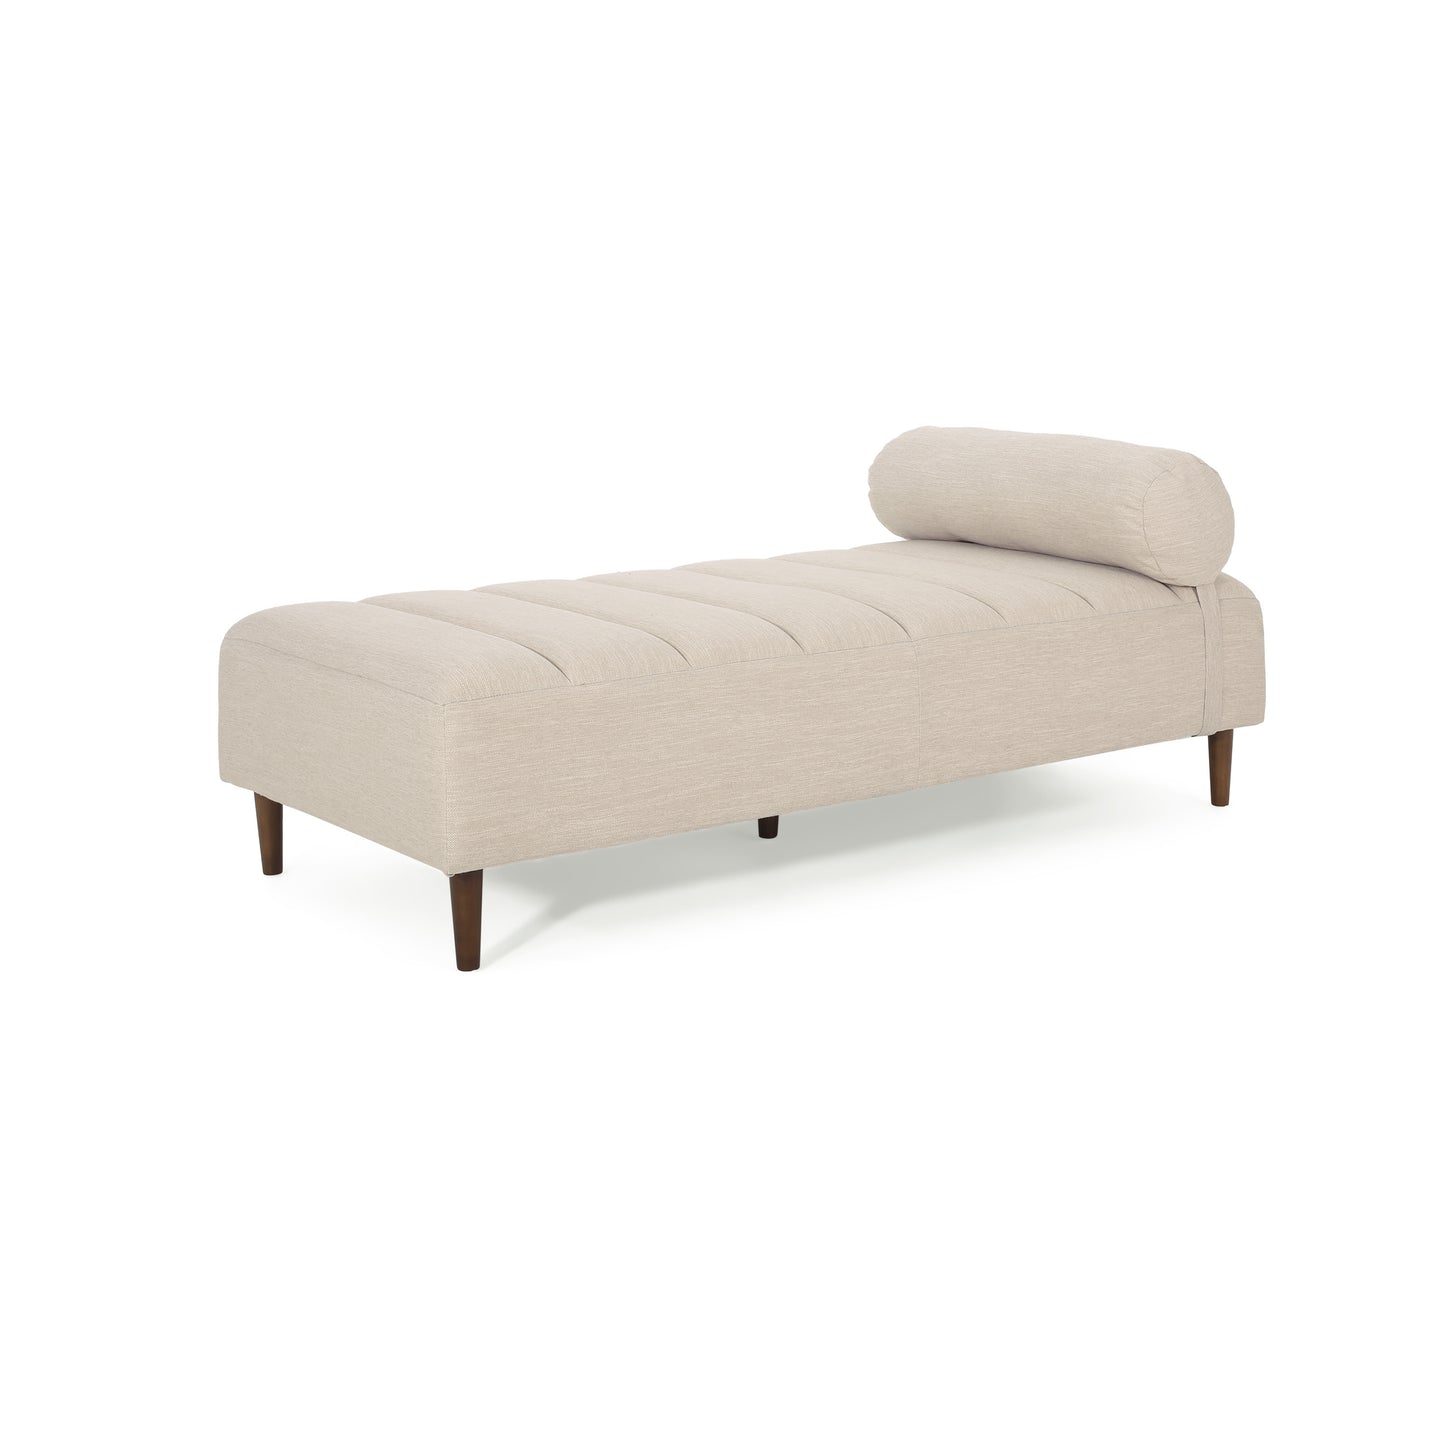 Holmwood Mid Century Modern Fabric Tufted Chaise Lounge with Bolster Pillow